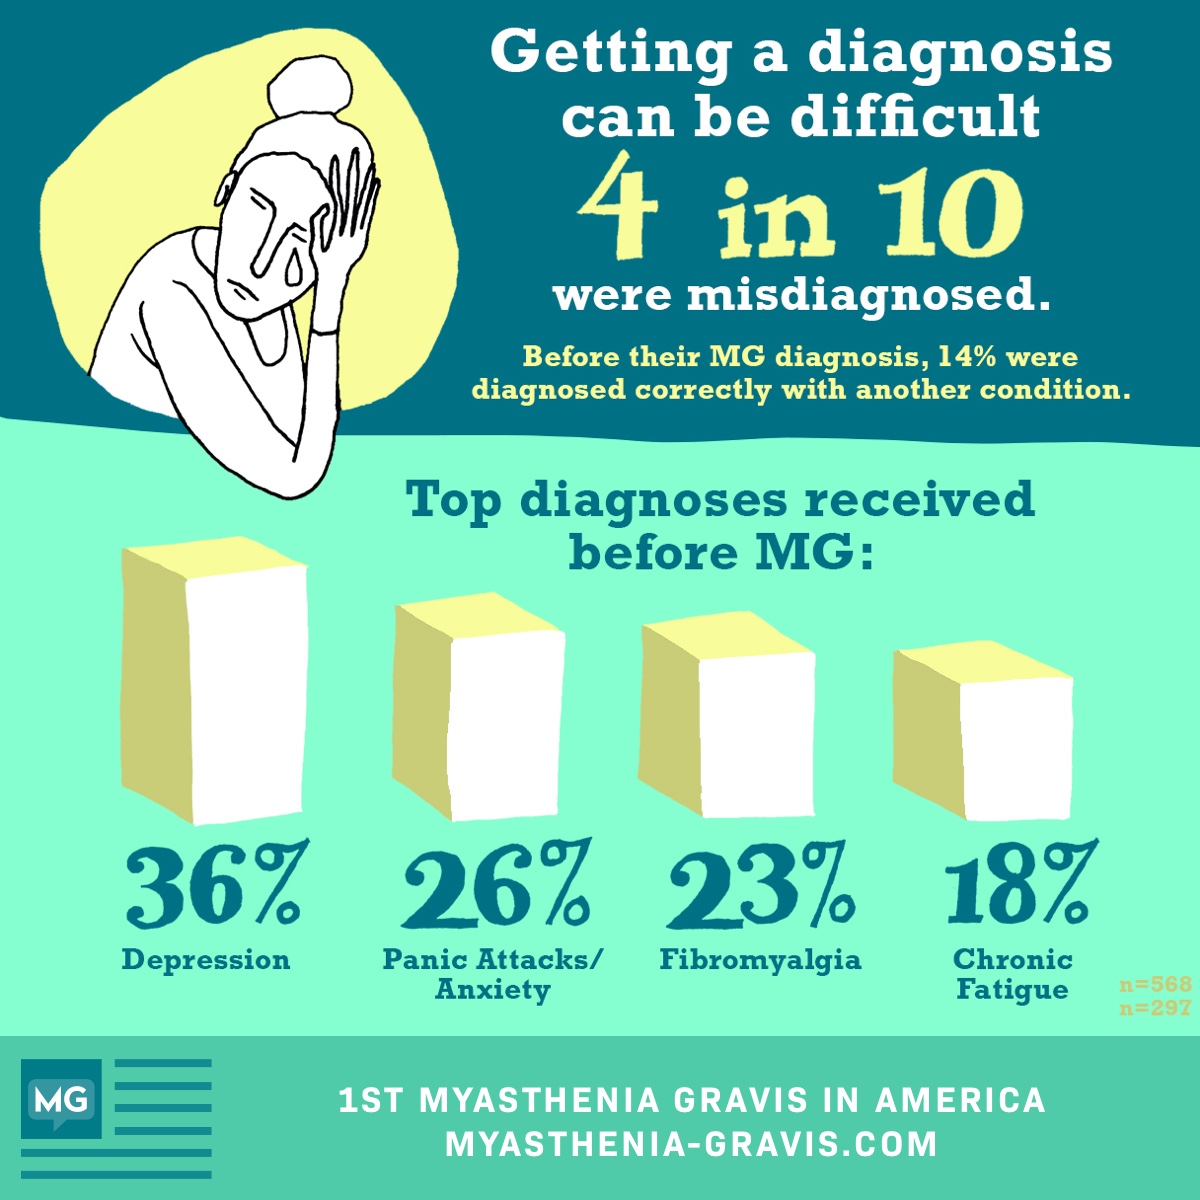 4 in 10 were misdiagnosed. Top diagnoses received before MG include depression, anxiety, fibromyalgia, and chronic fatigue.